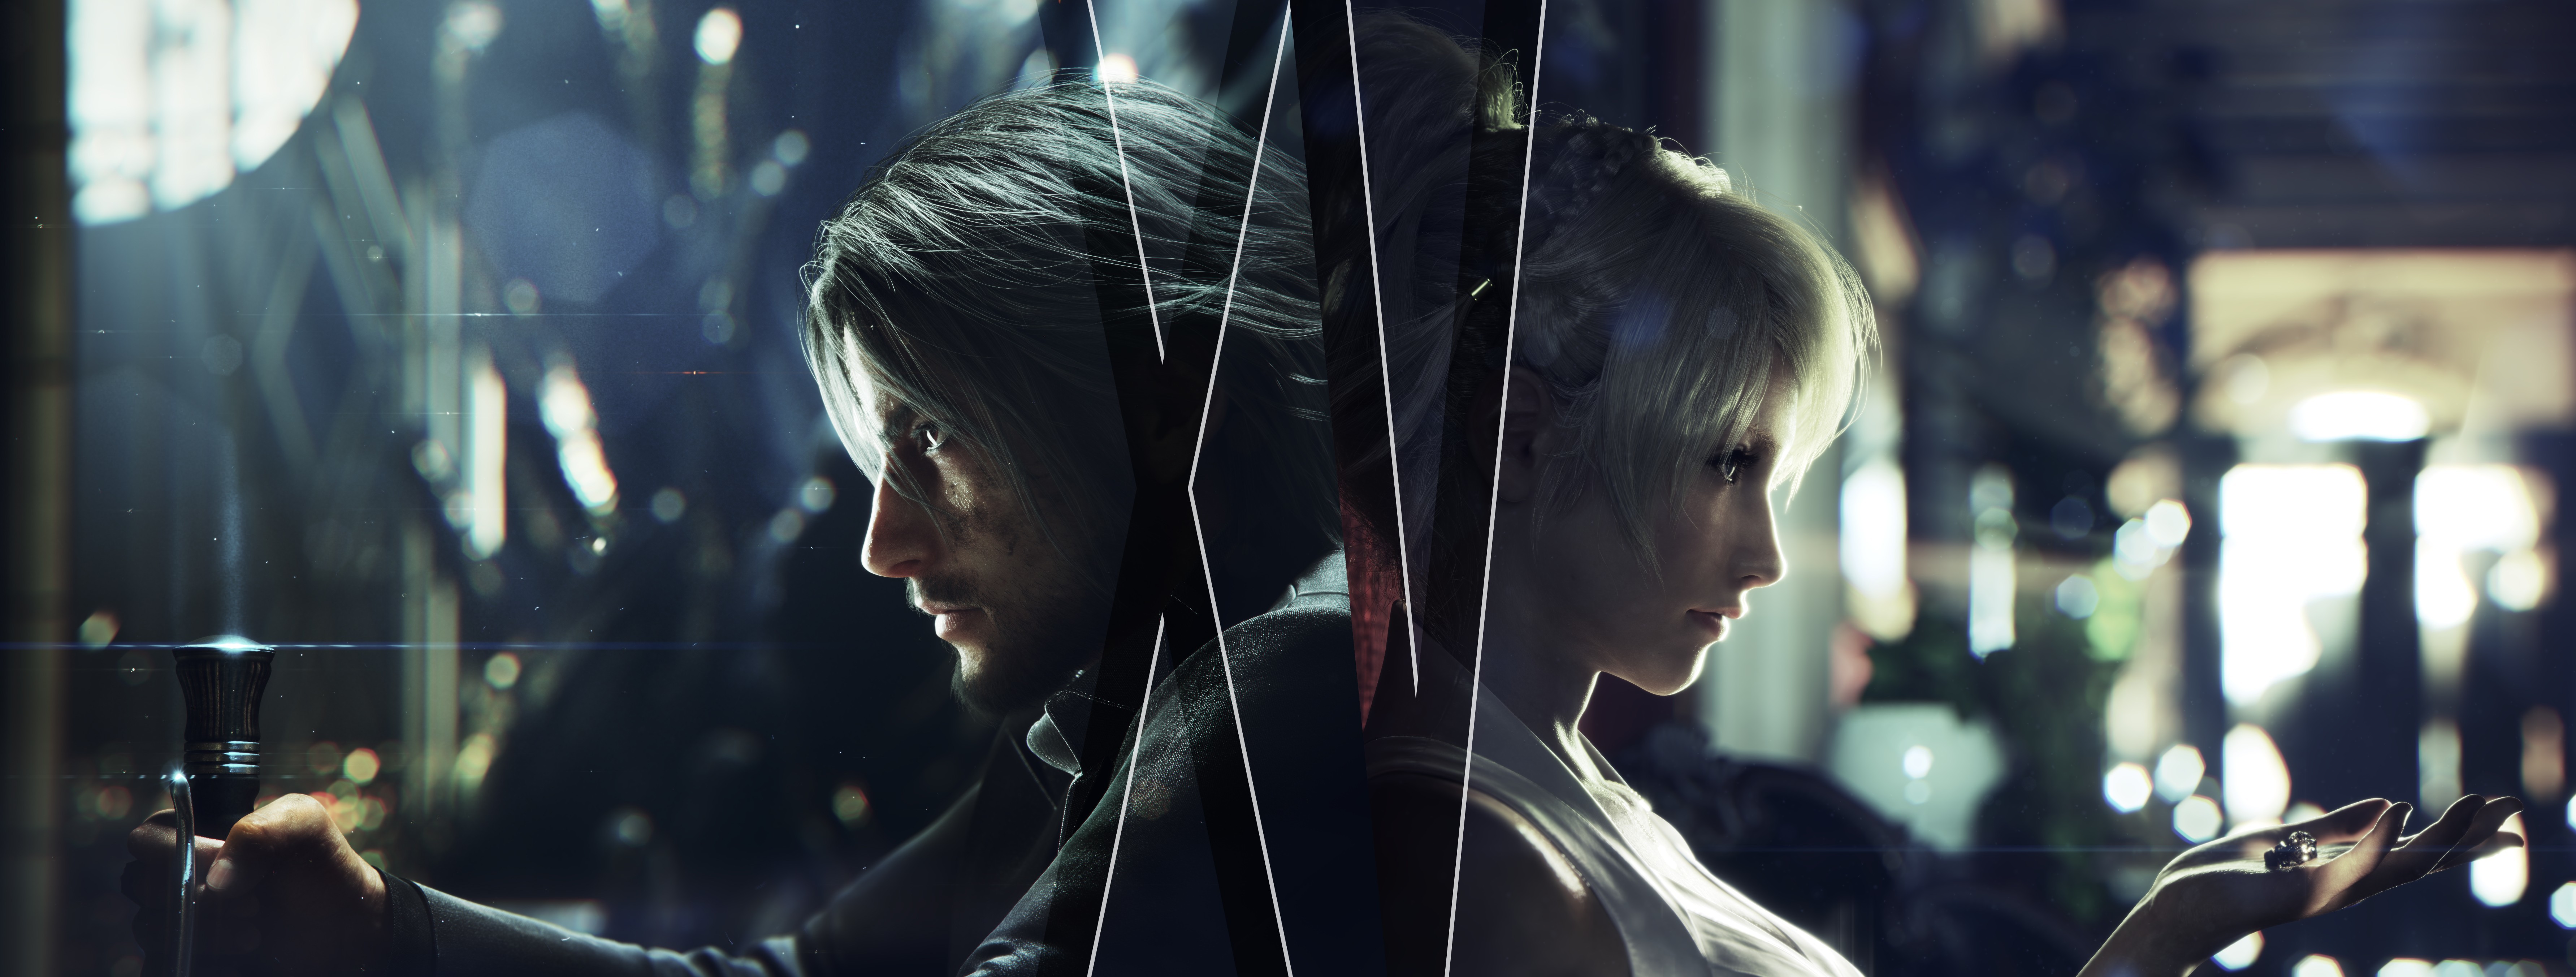 wallpaper material that Square Enix given away on FF XV